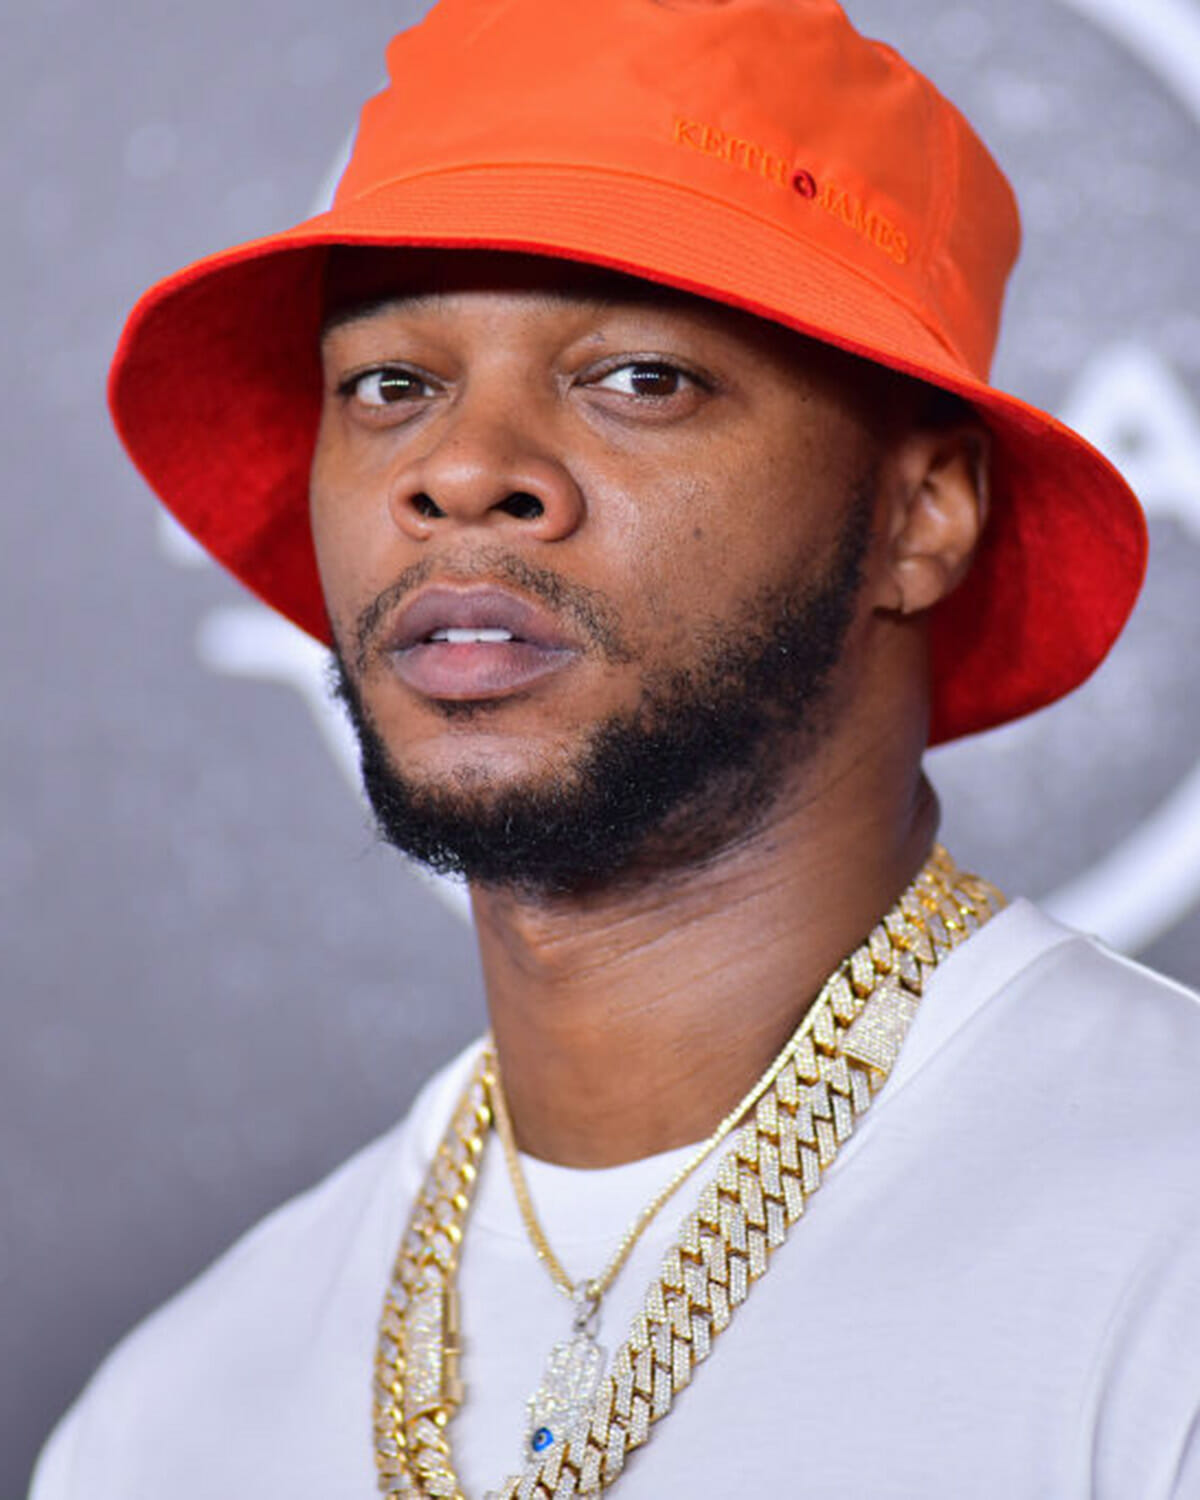 Papoose in diamond chain